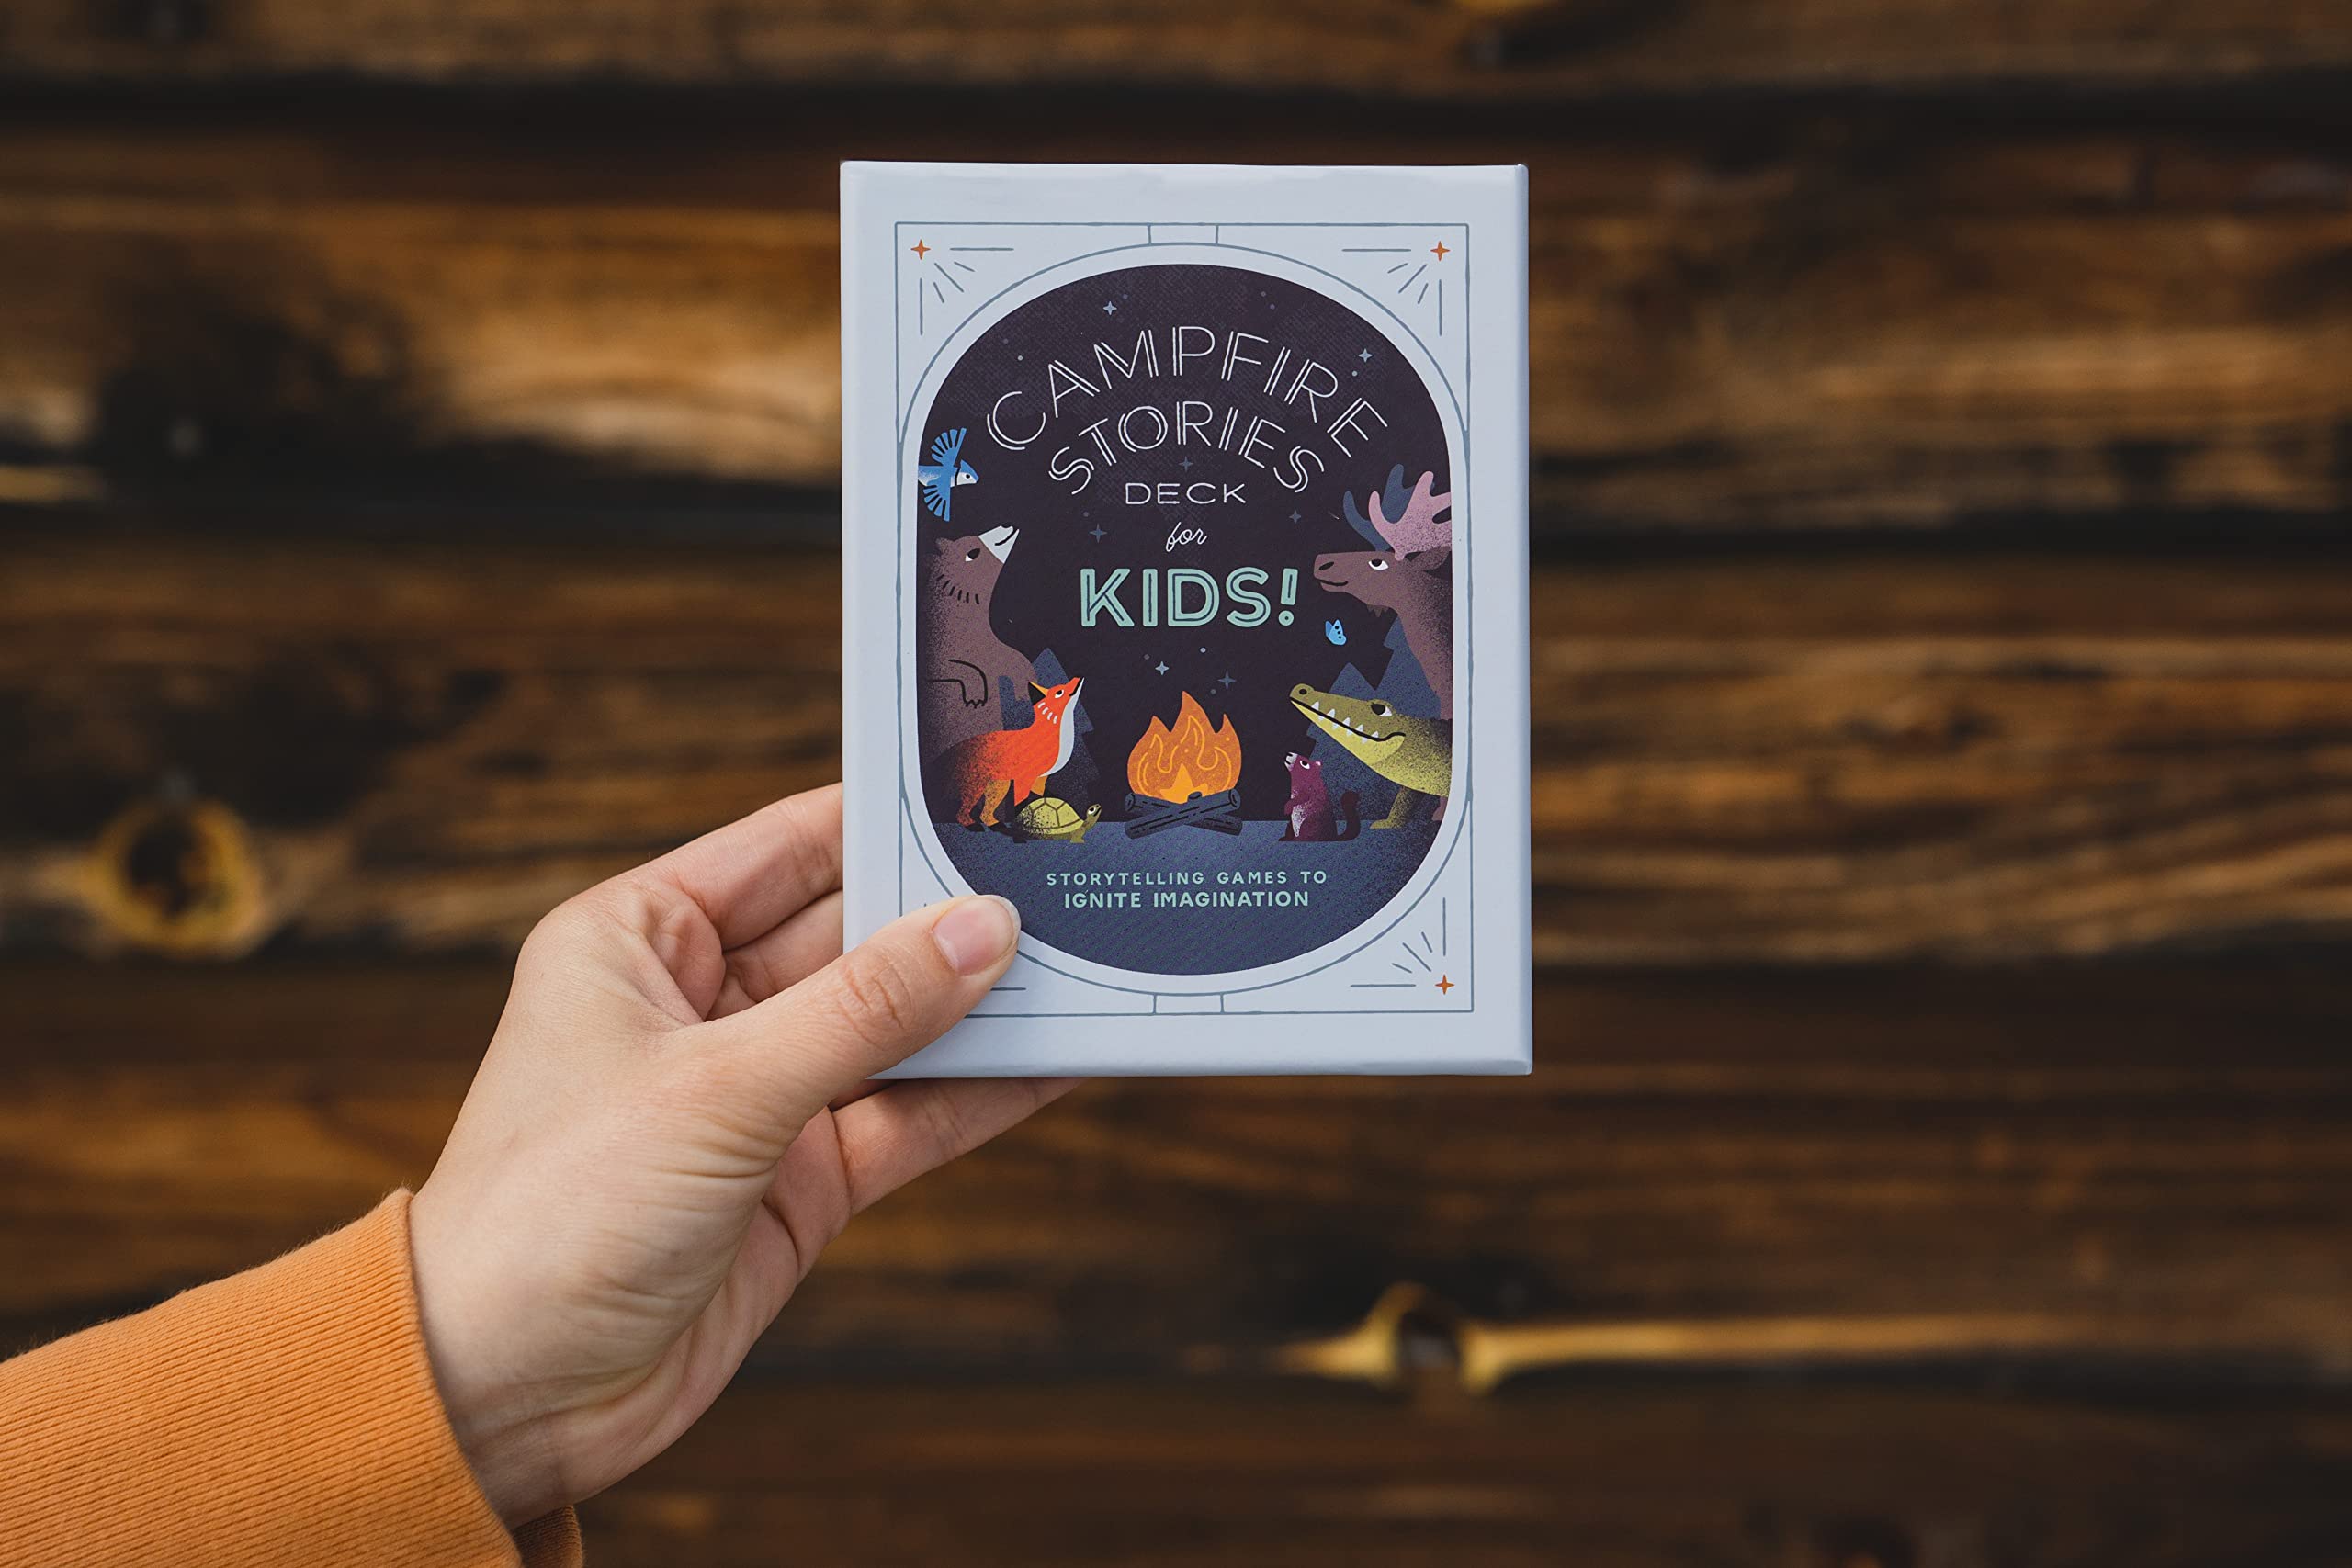 Campfire Stories Deck--For Kids!: Storytelling Games to Ignite Imagination